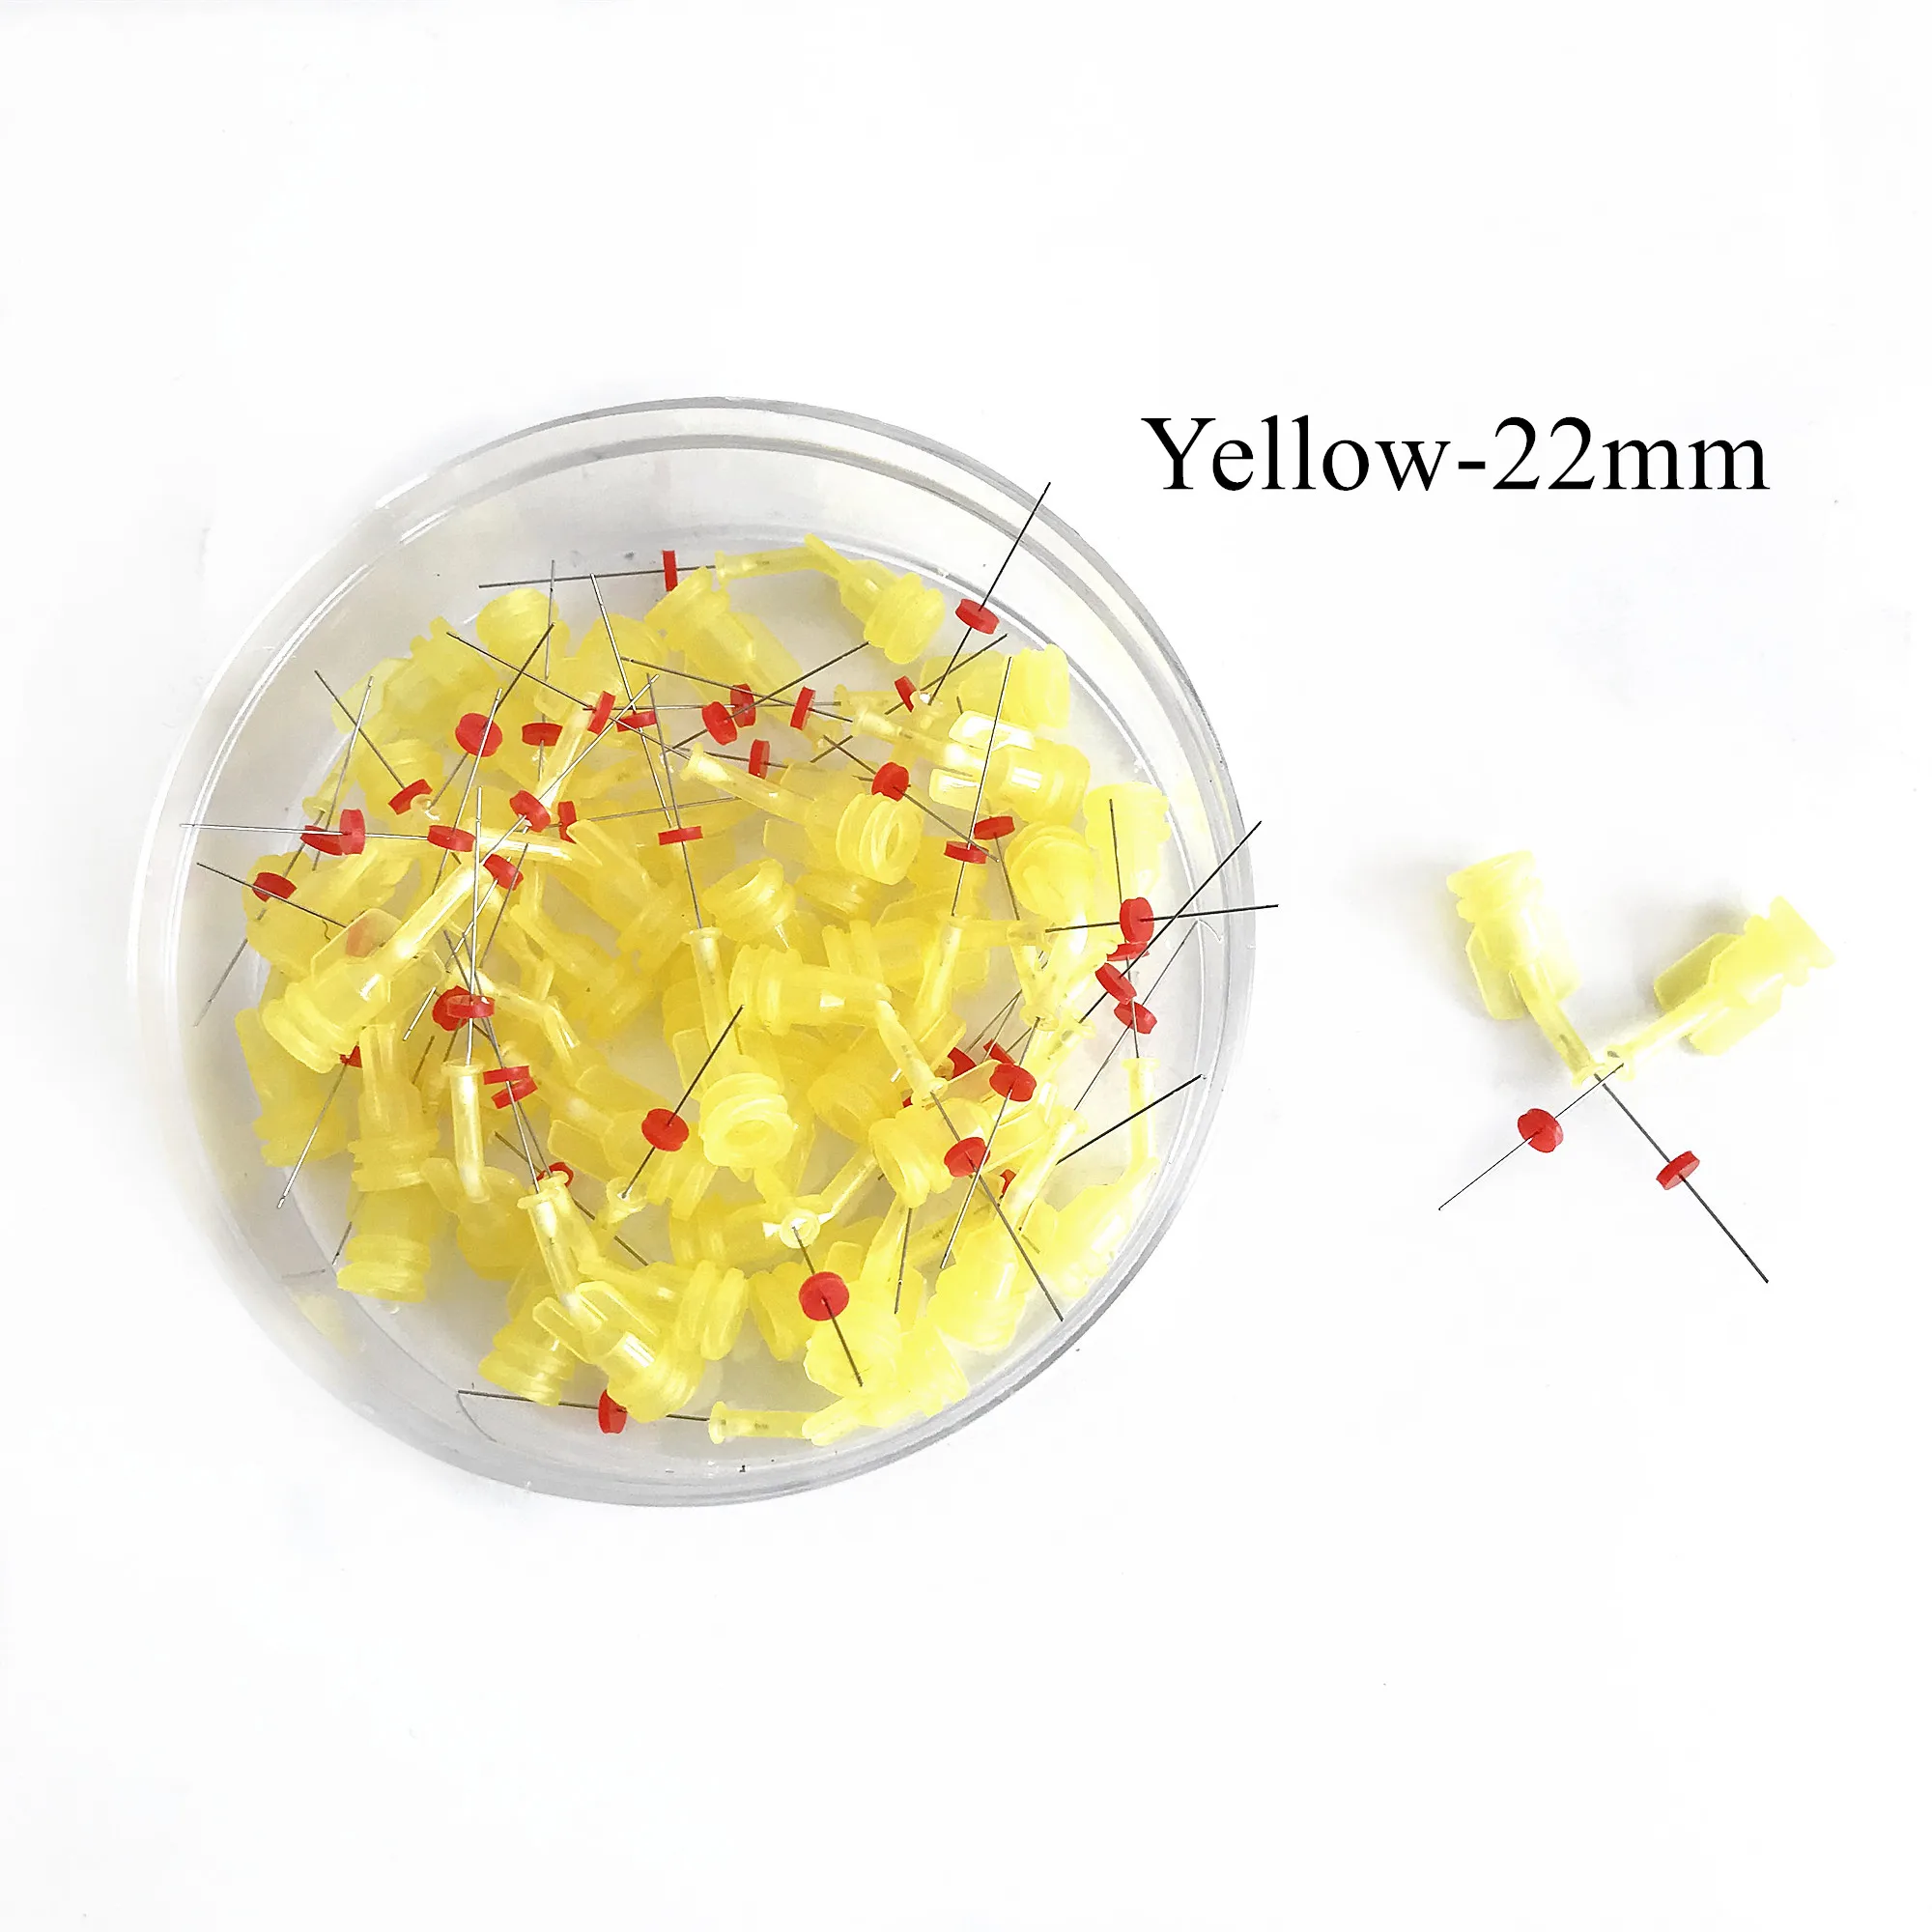 

50Pcs/Box Dental Irrigation Tips Sideport Smallest Irrigator Delivery Tip Irrigant Yellow-22mm